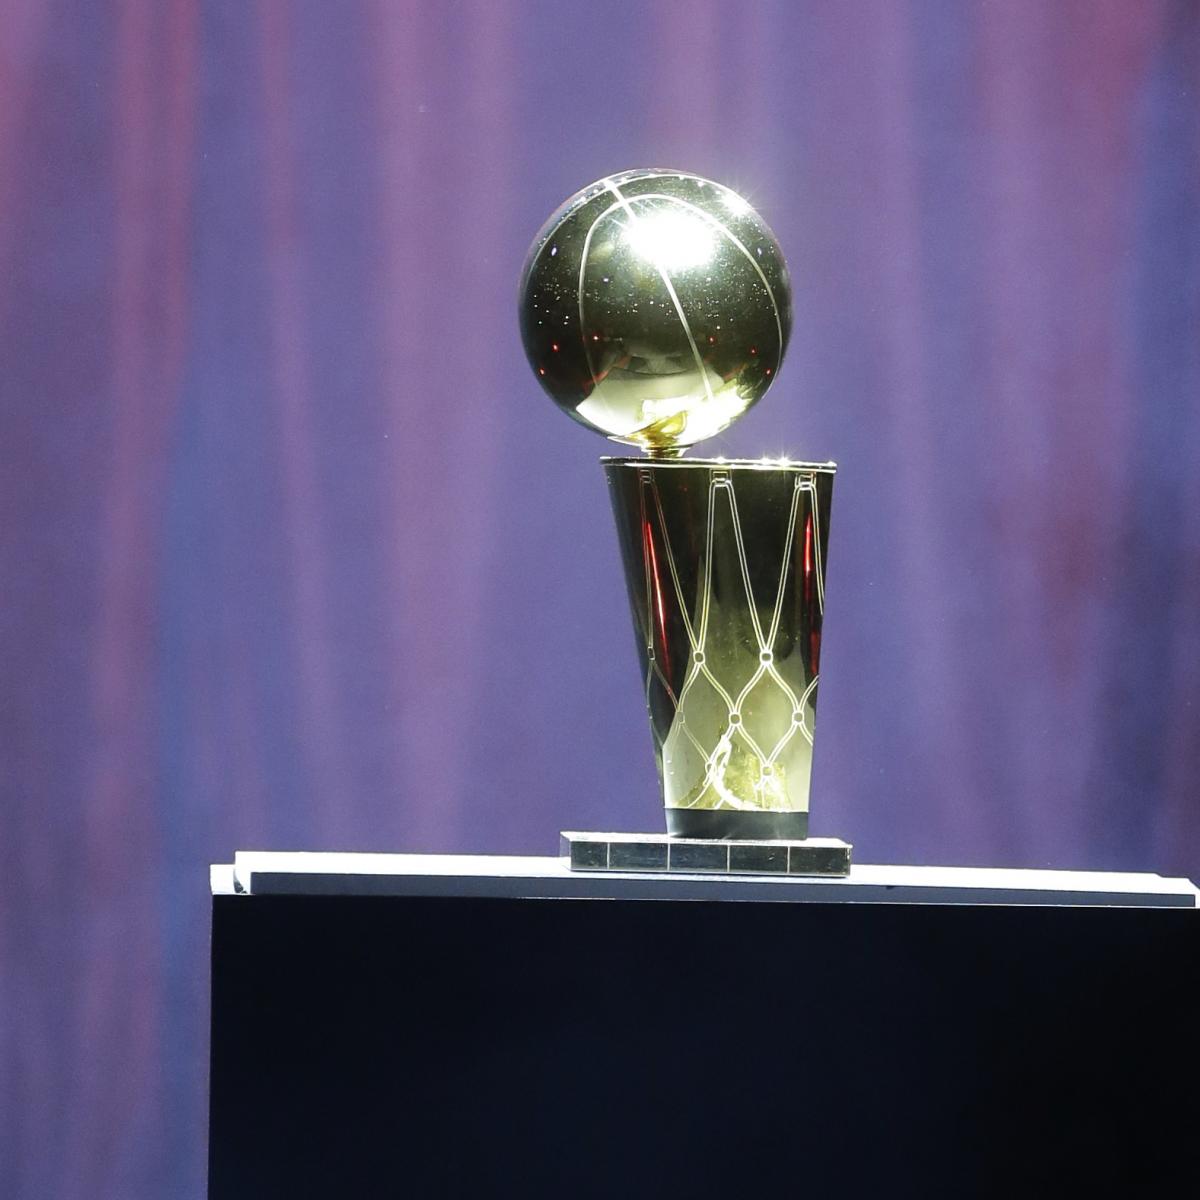 LV Delivers 2020 NBA Finals Trophy in Bespoke Travel Case to